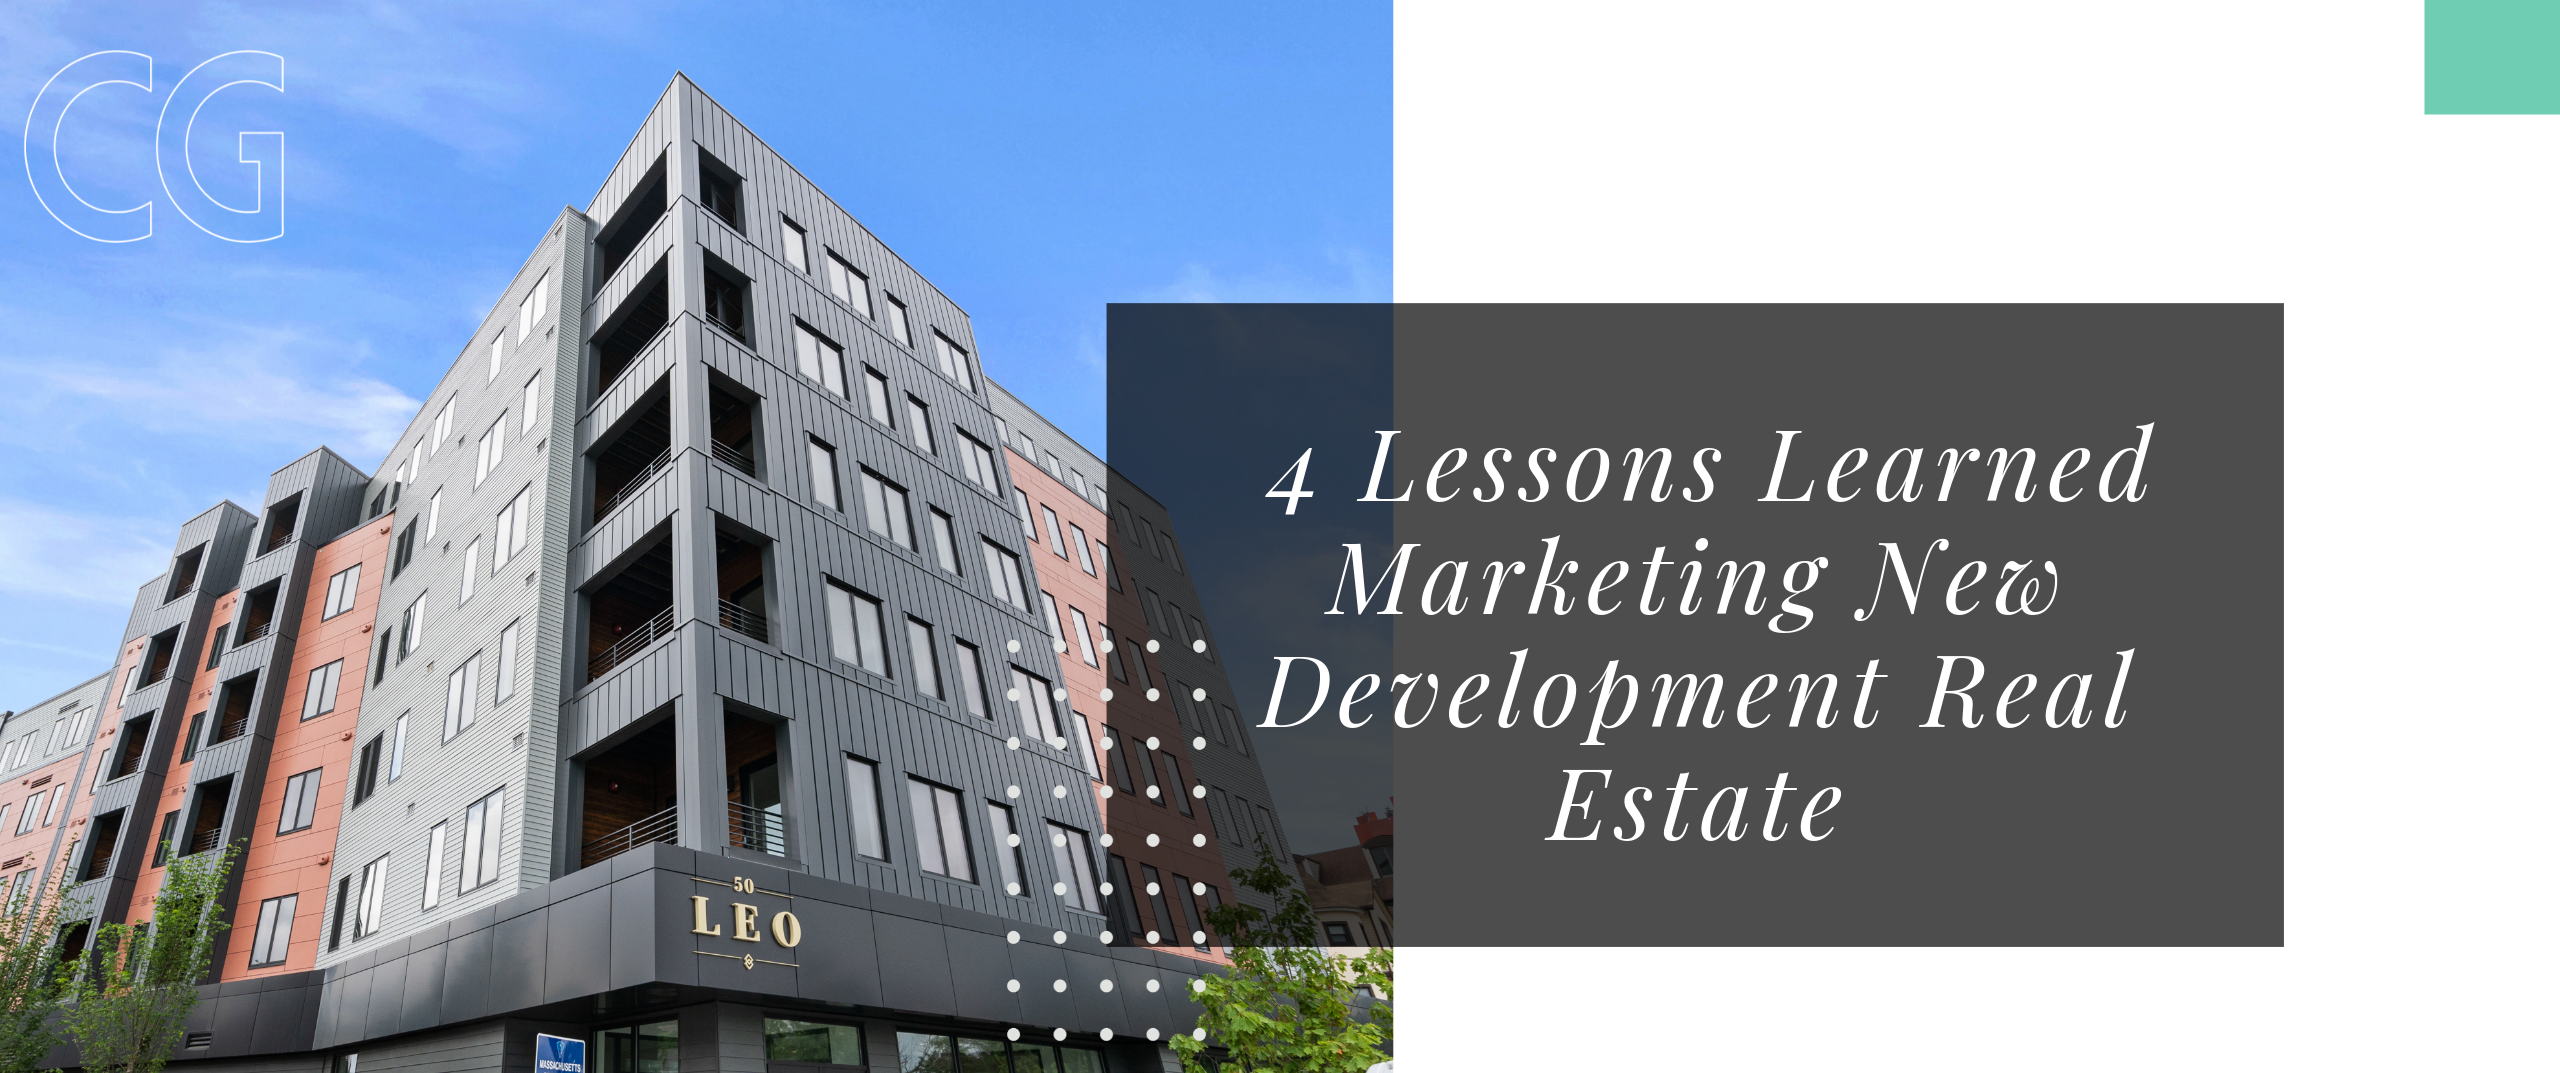 4 Lessons Learned Marketing New Development Real Estate